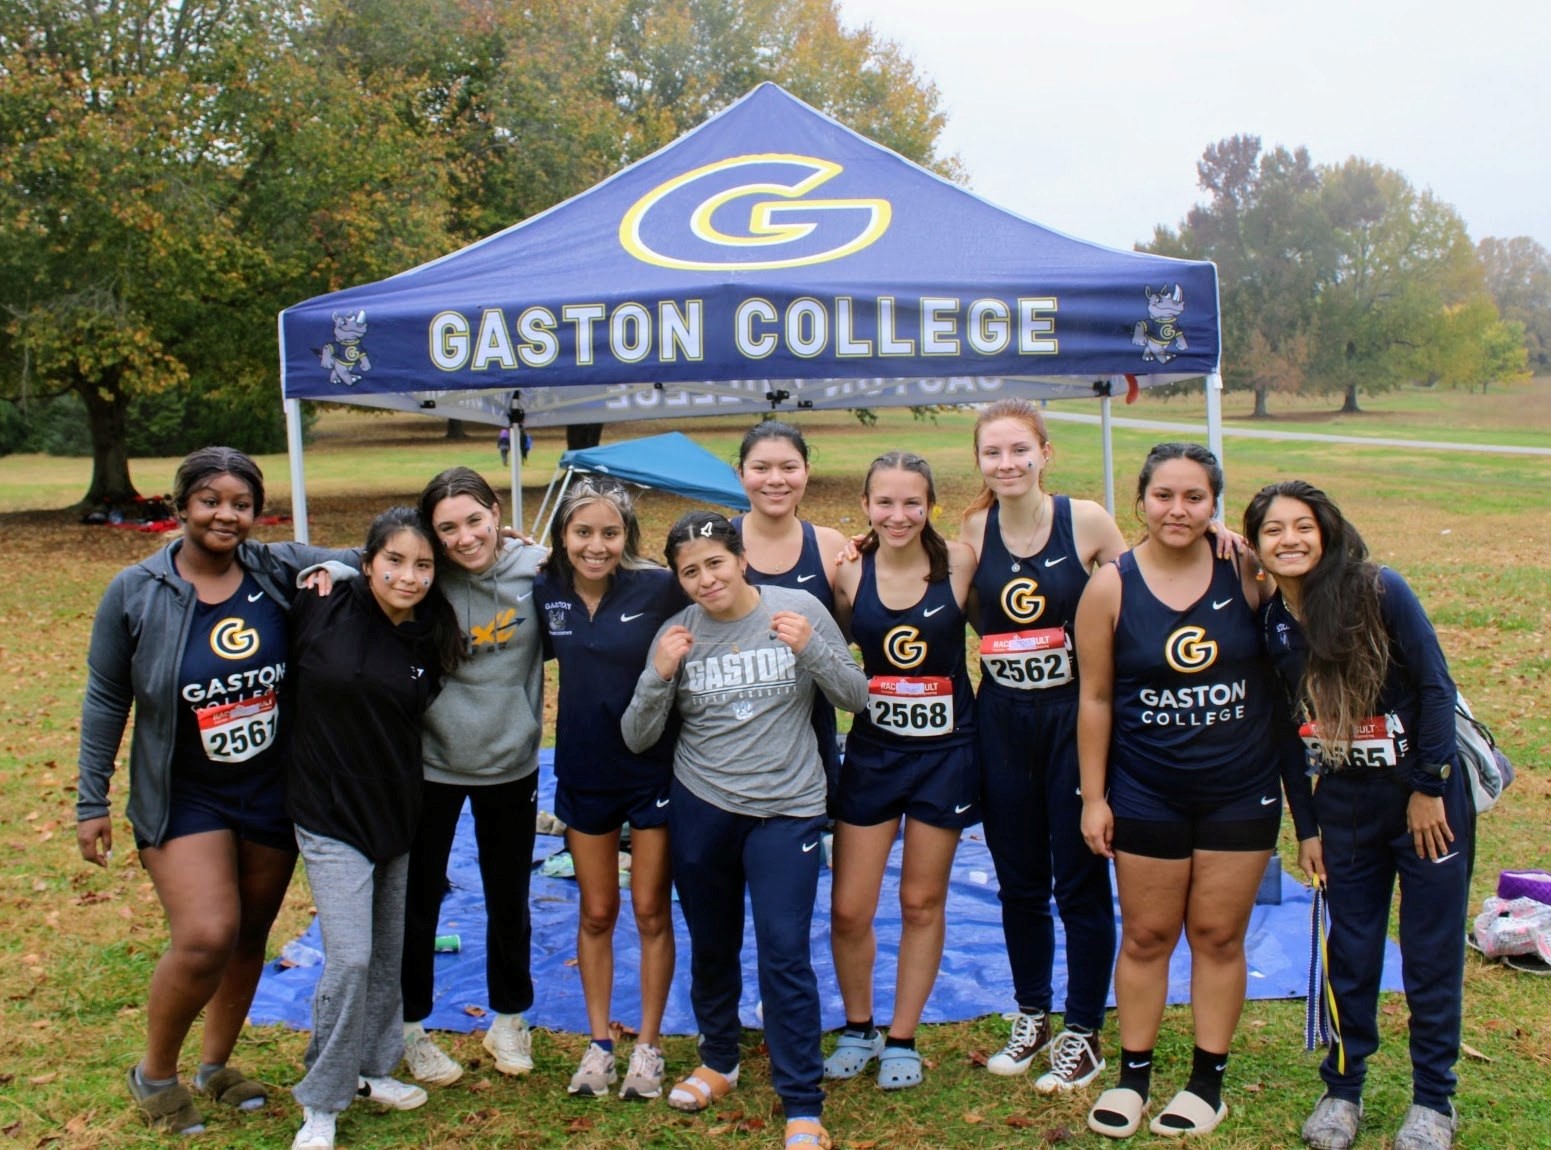 Gaston College's women's cross country team after finishing second in the 2022 Region 10 championships in Spartanburg, S.C.